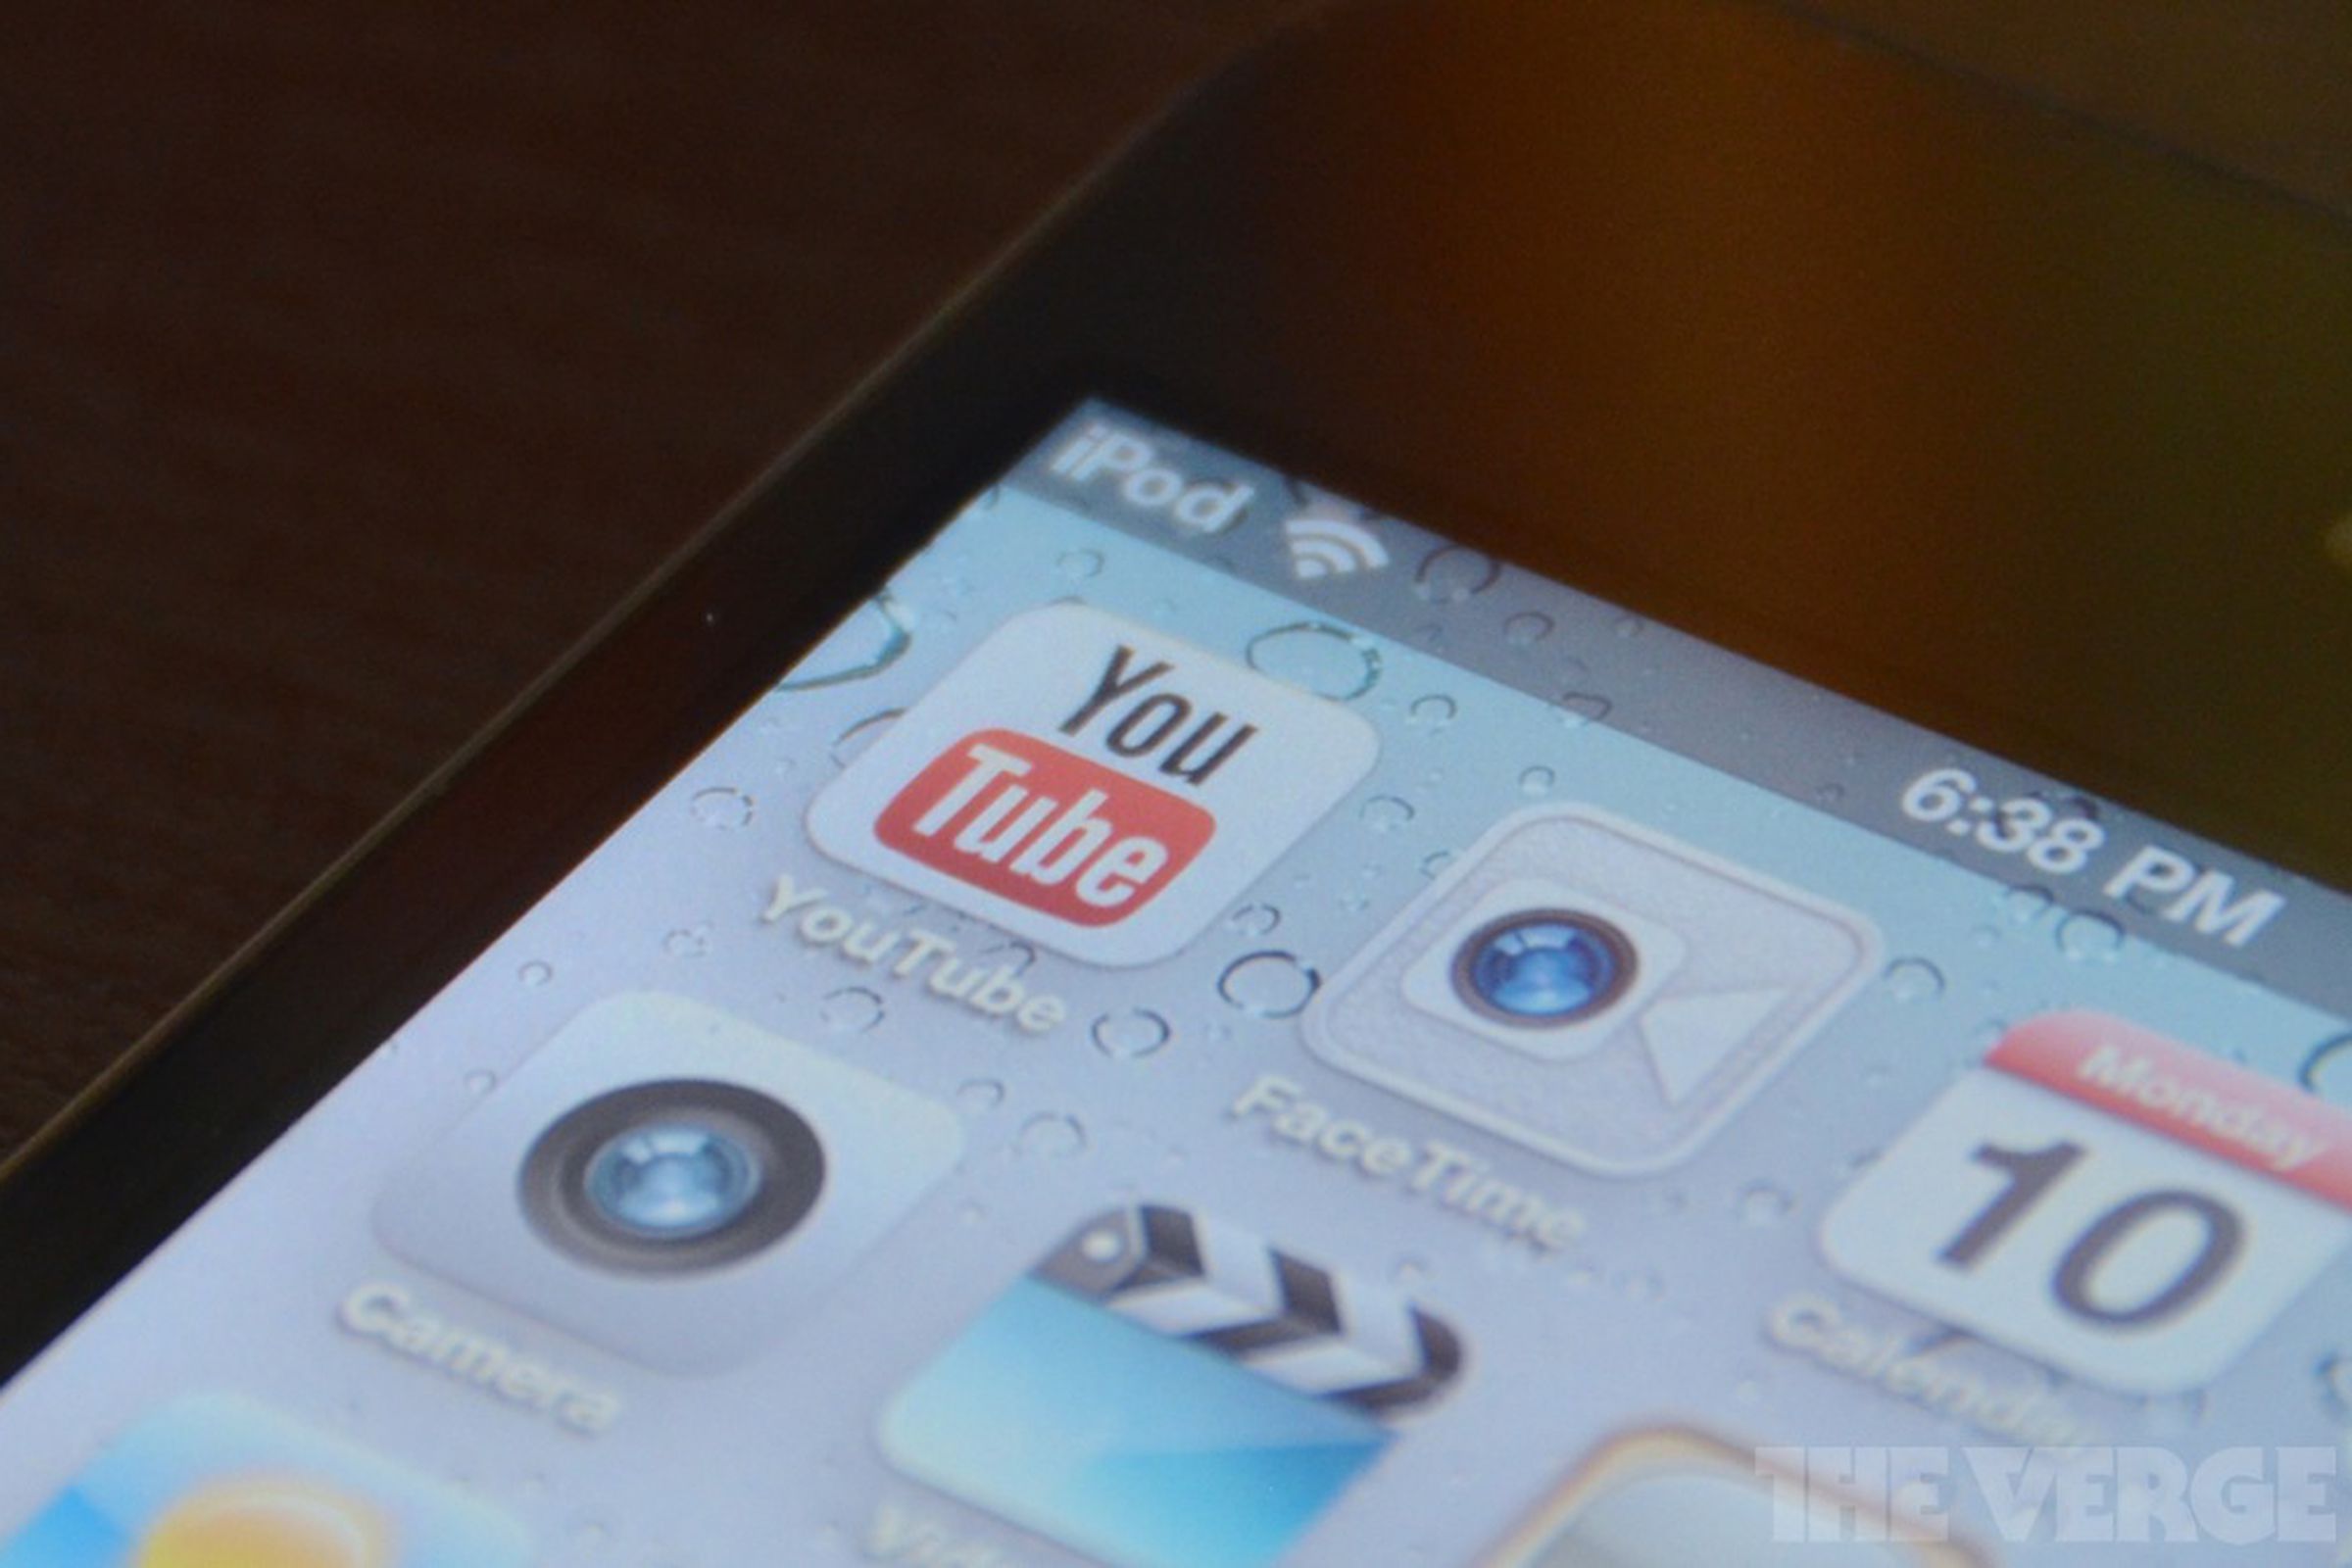 Gallery Photo: YouTube app for iPhone hands-on photos